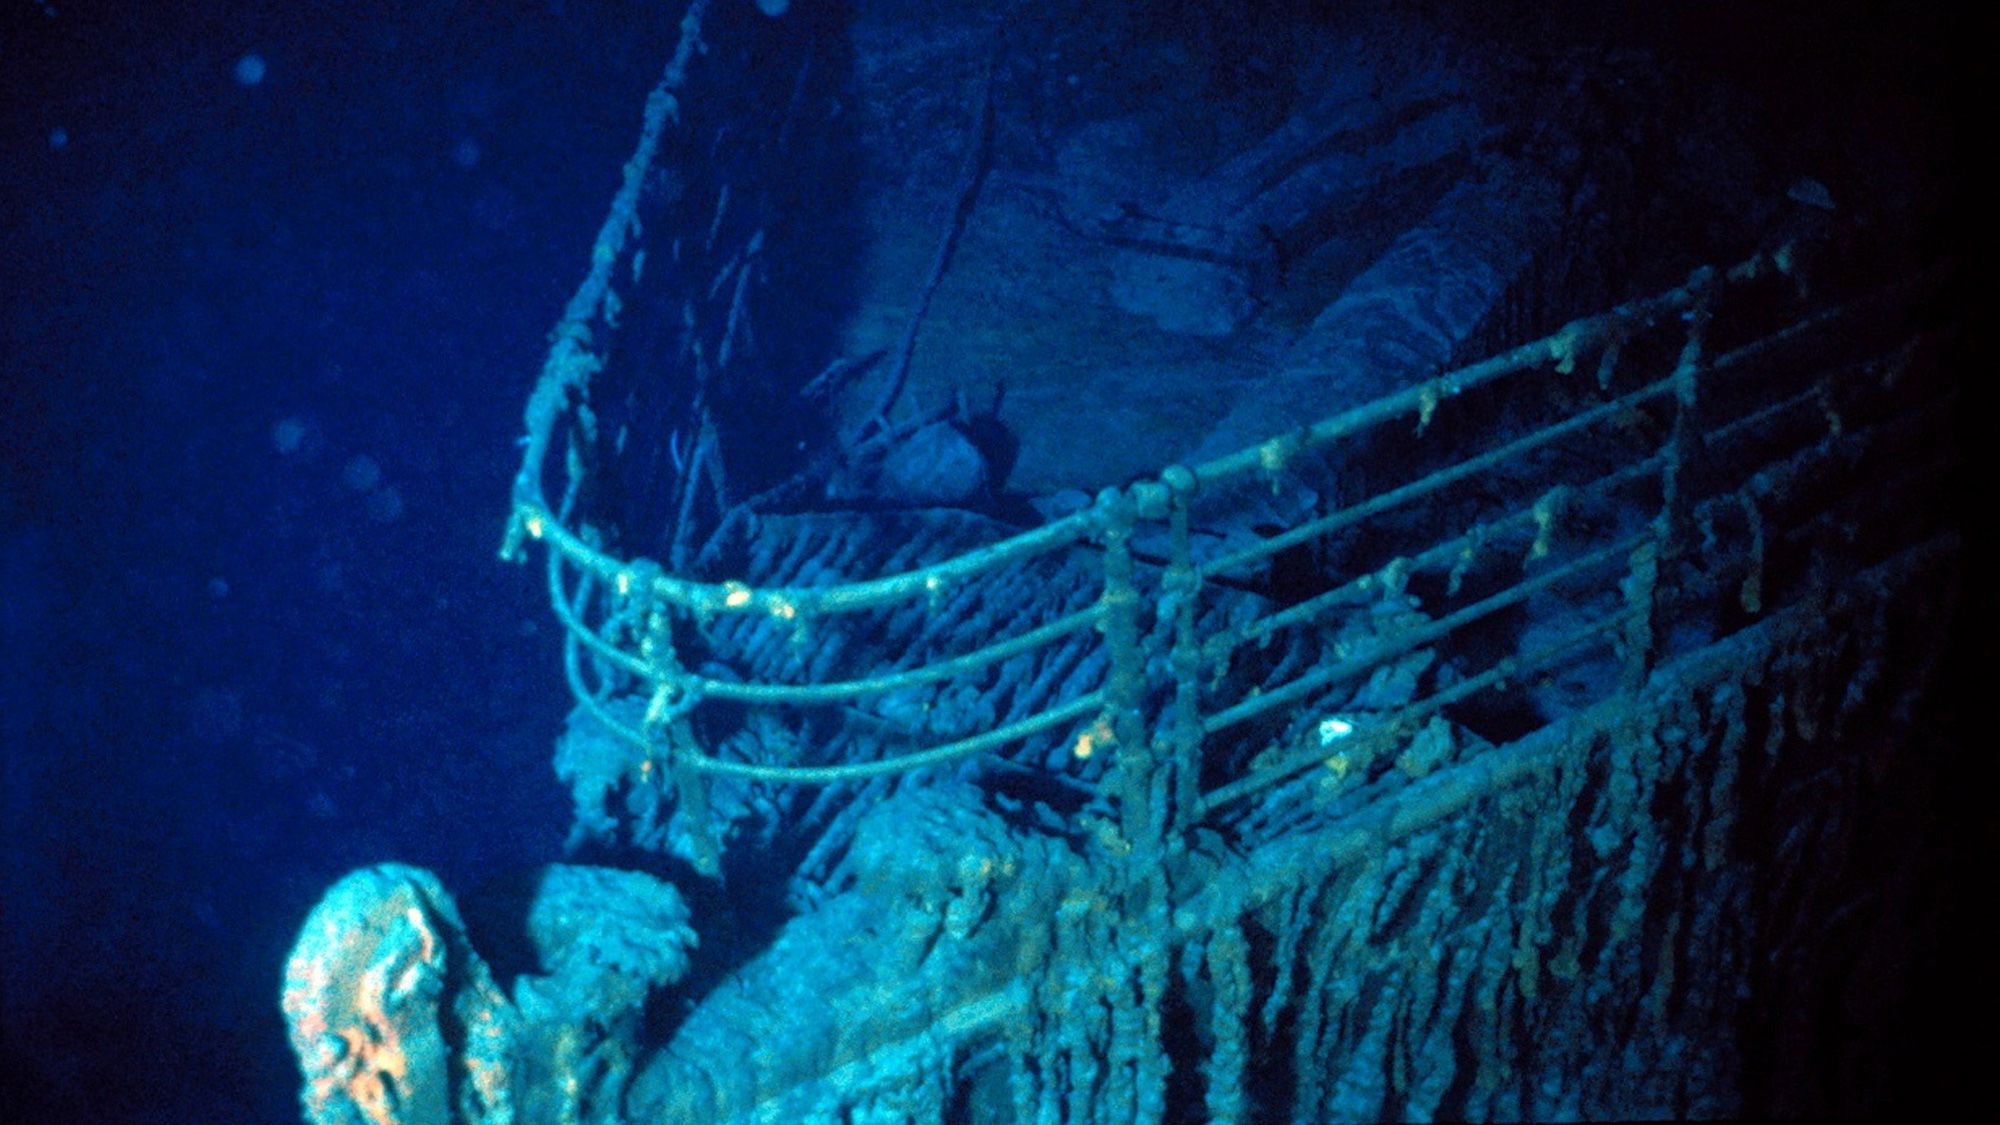 Submersible touring Titanic wreckage went missing in the Atlantic. A search  is underway | CNN